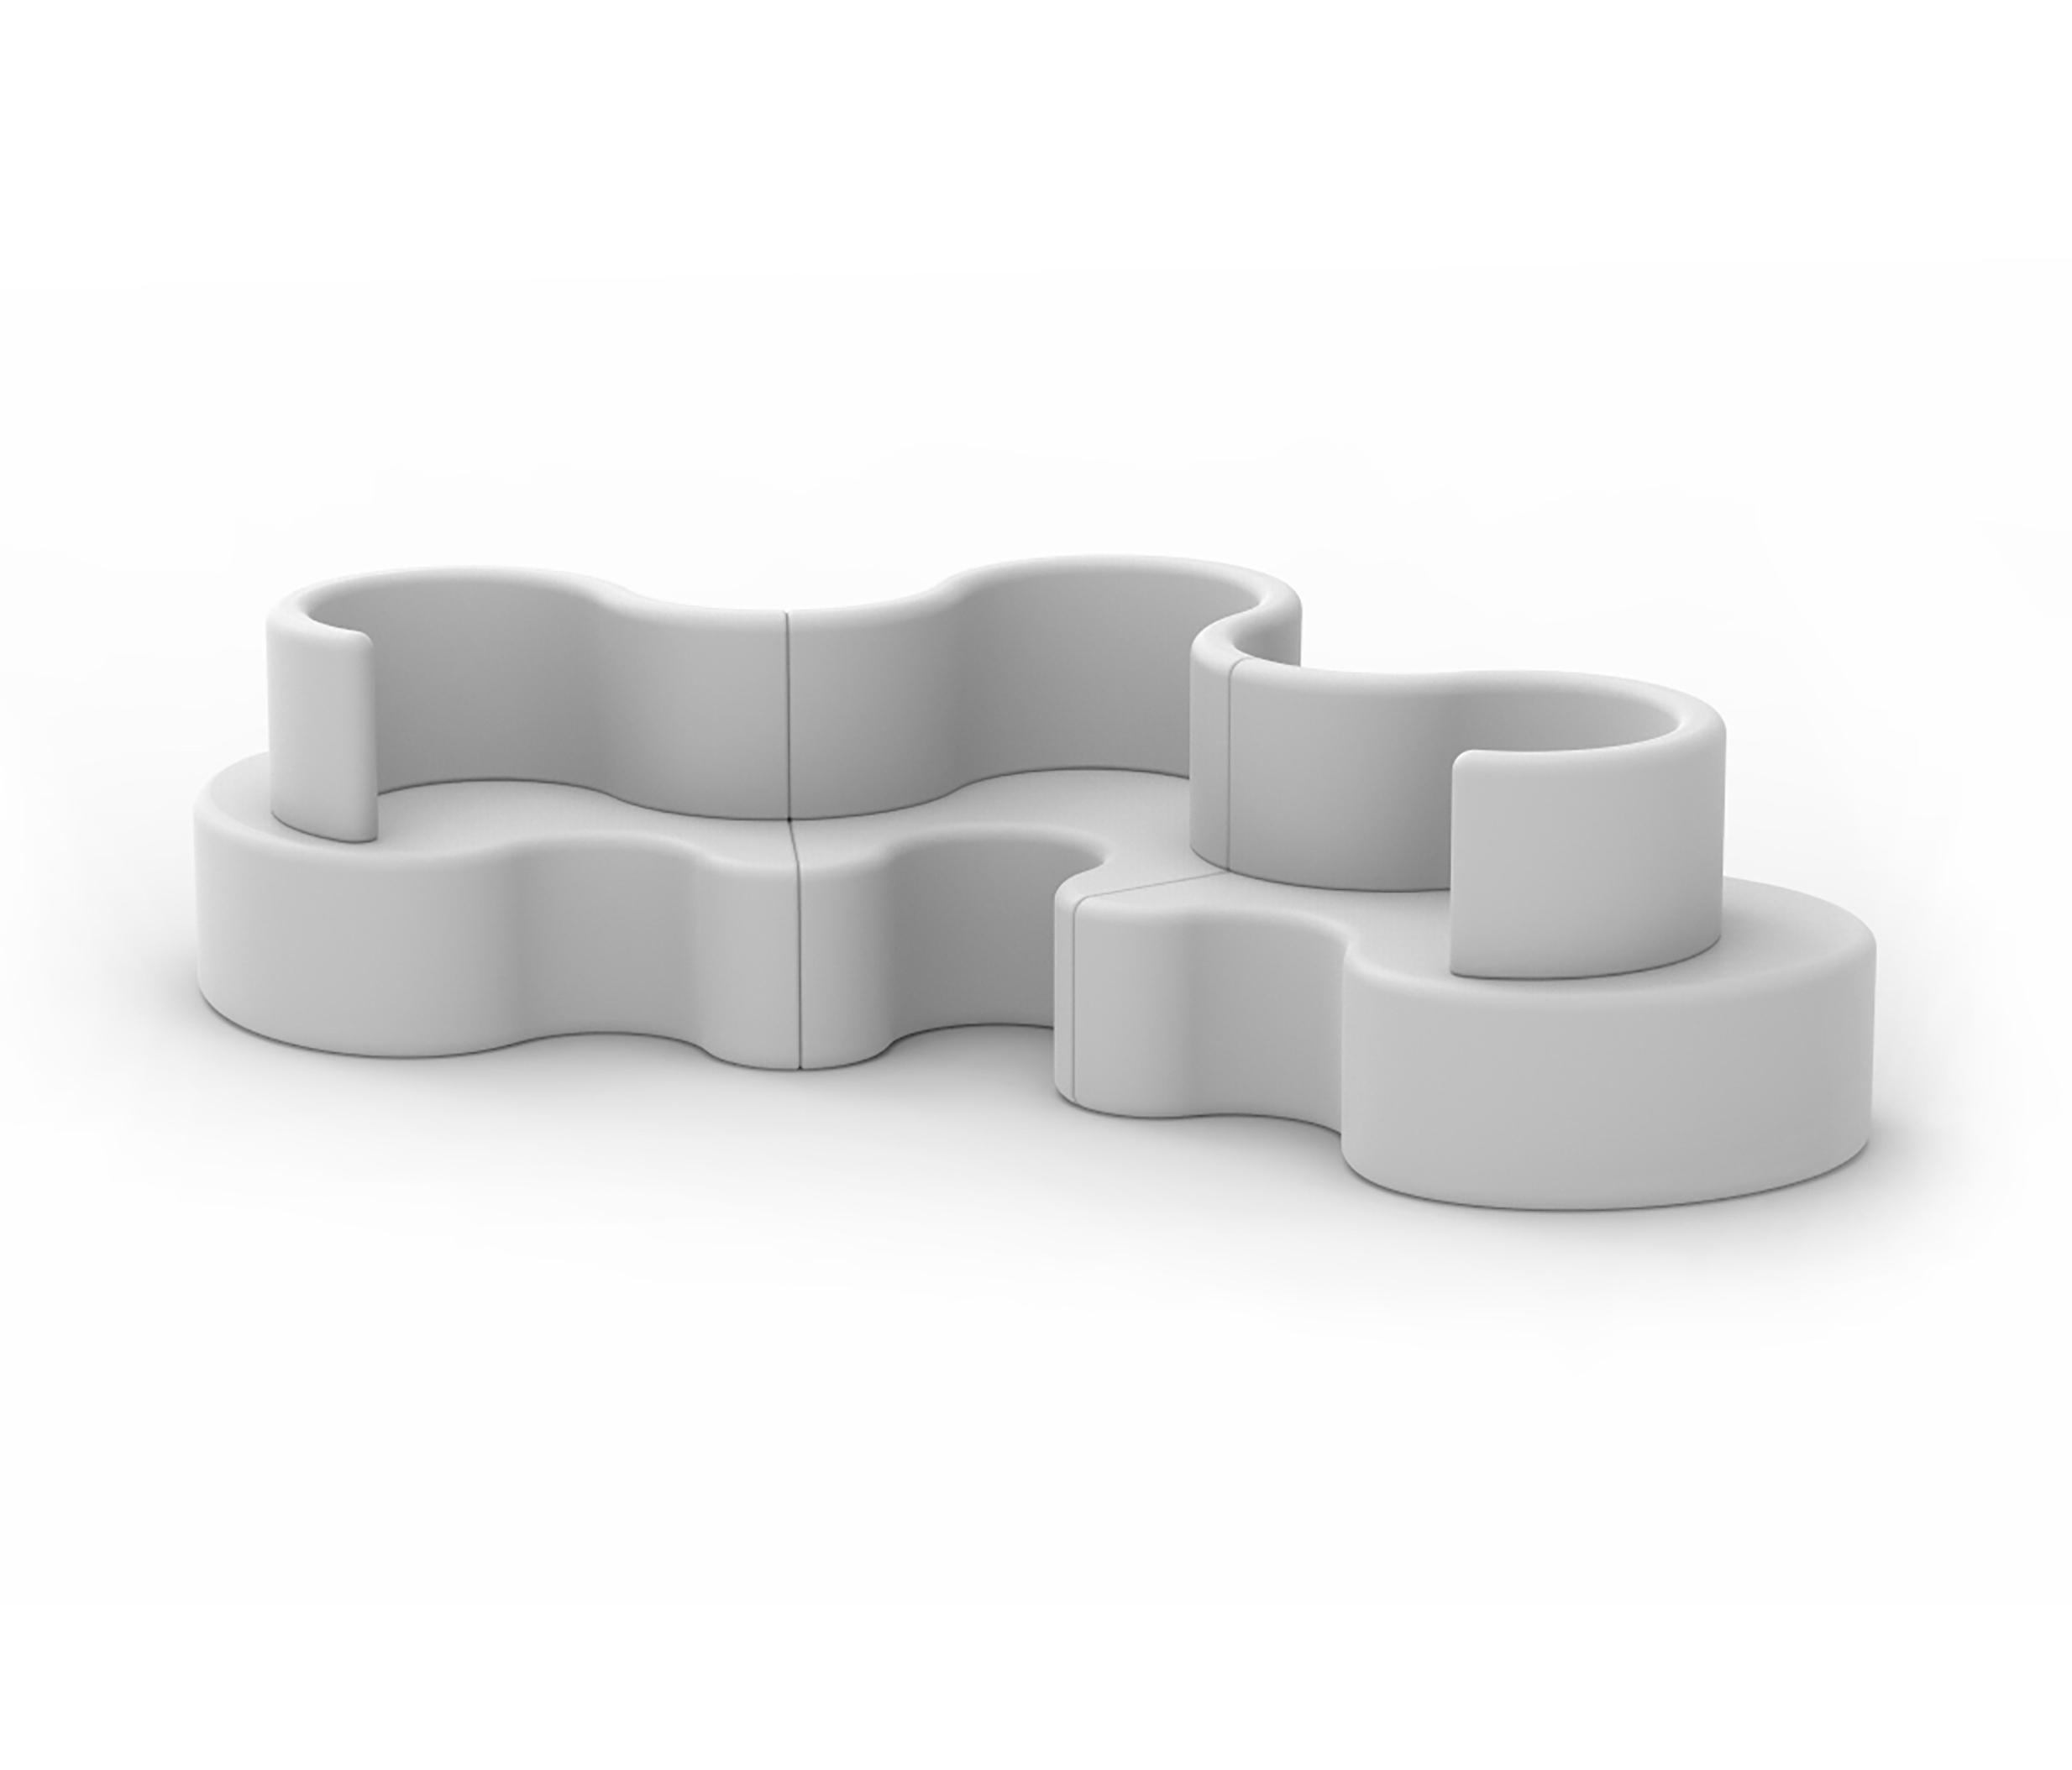 Cloverleaf | Sofa In- & Outdoor | Architonic